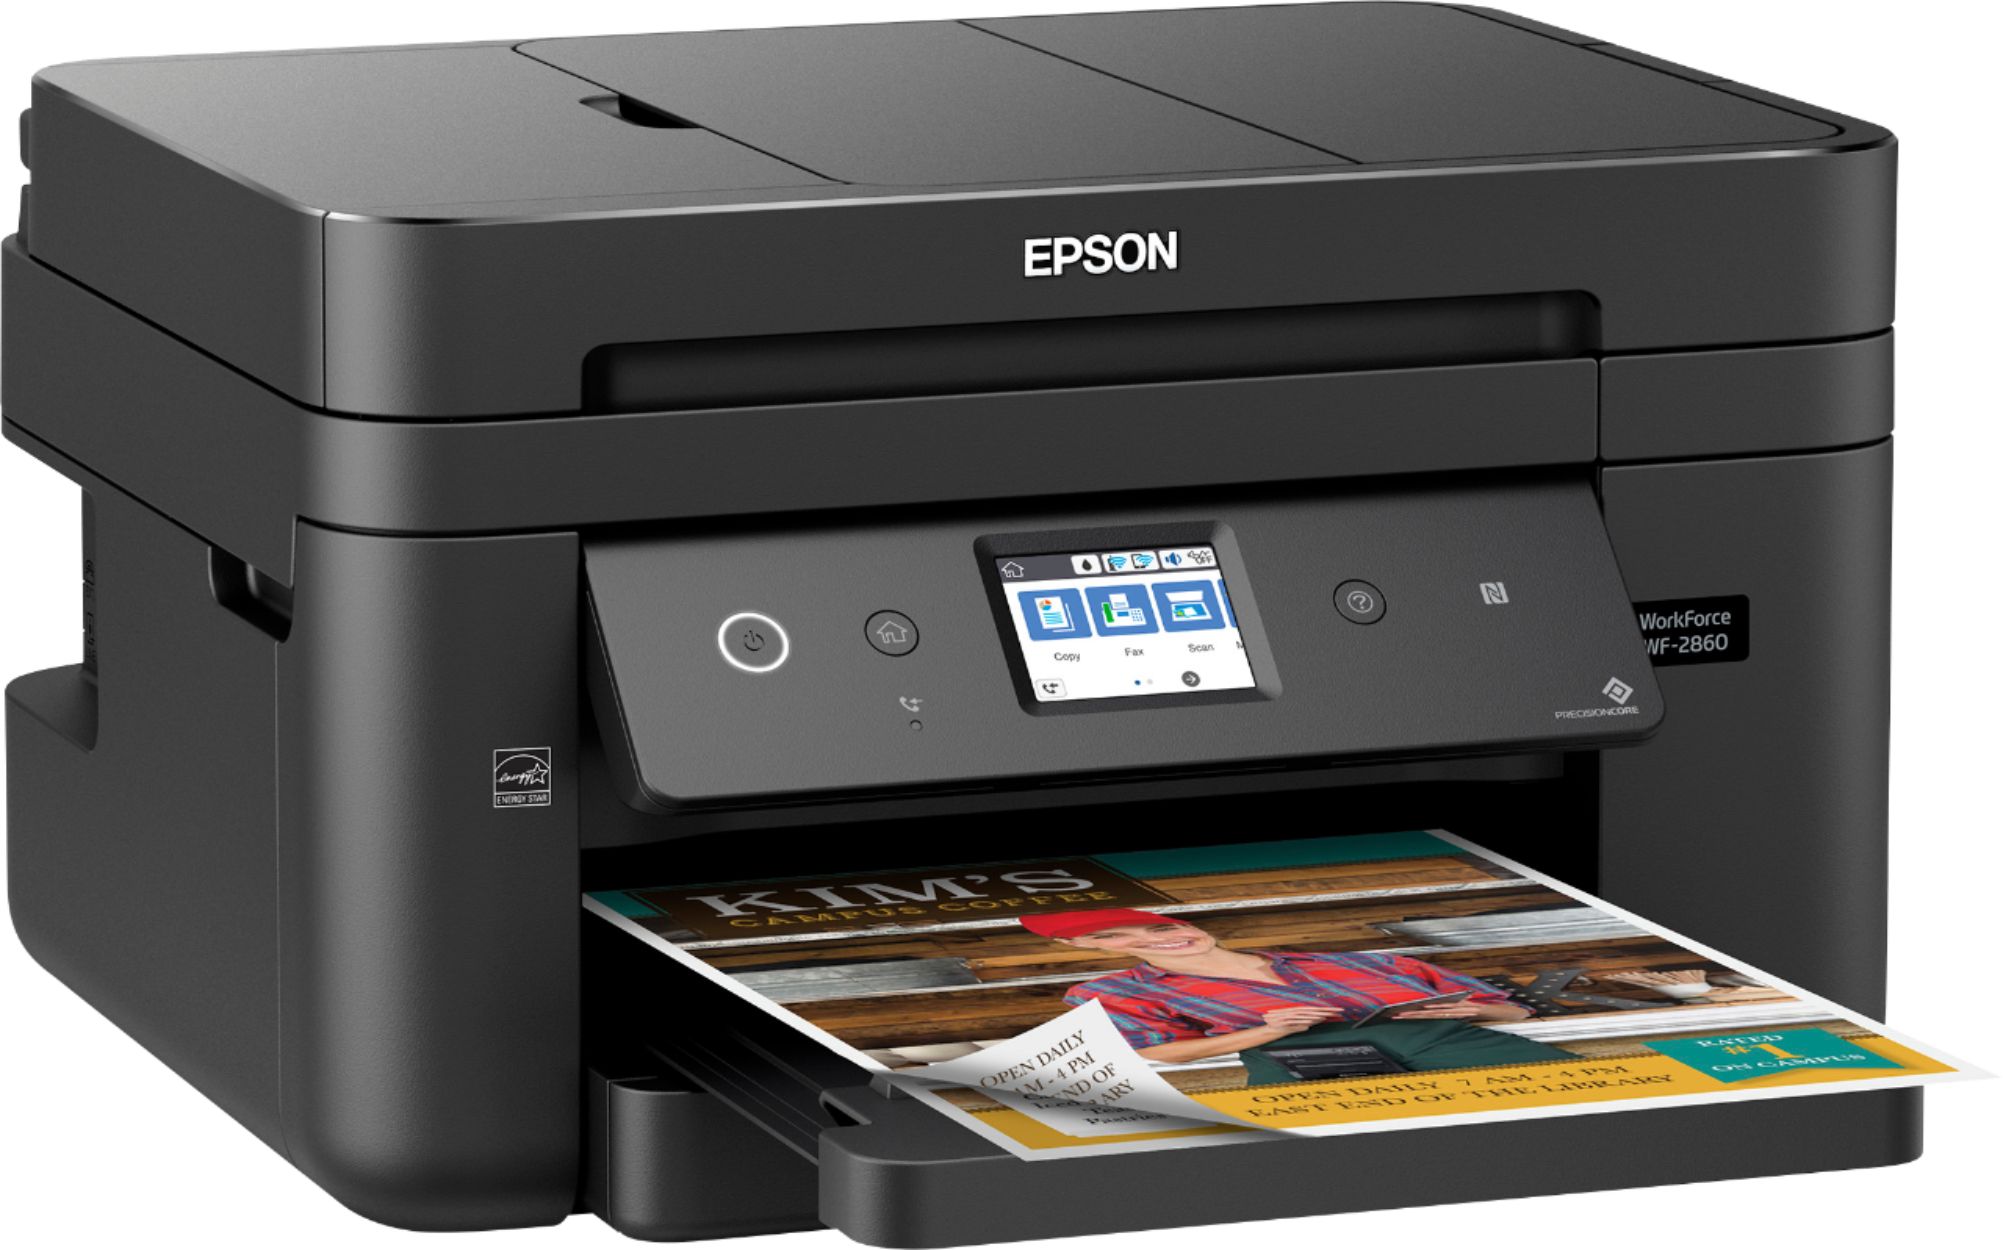 Angle View: Epson - WorkForce WF-2860 Wireless All-In-One Inkjet Printer - Black